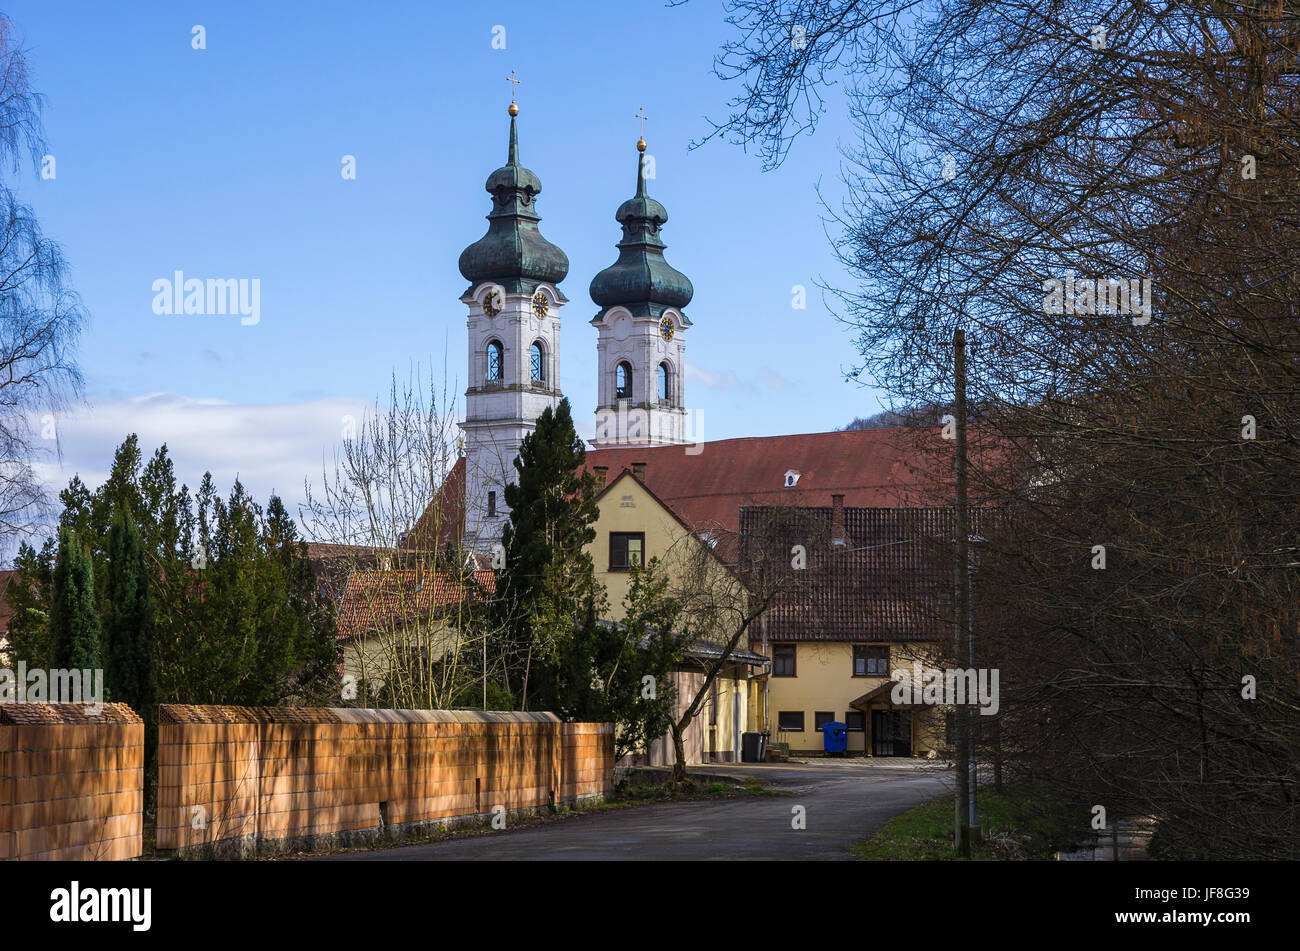 wiefalten, Germany - March 28, 2016: Exterior view of the minster of Our Lady in Zwiefalten in Upper Swabia, Wurttemberg, Germany. Stock Photo